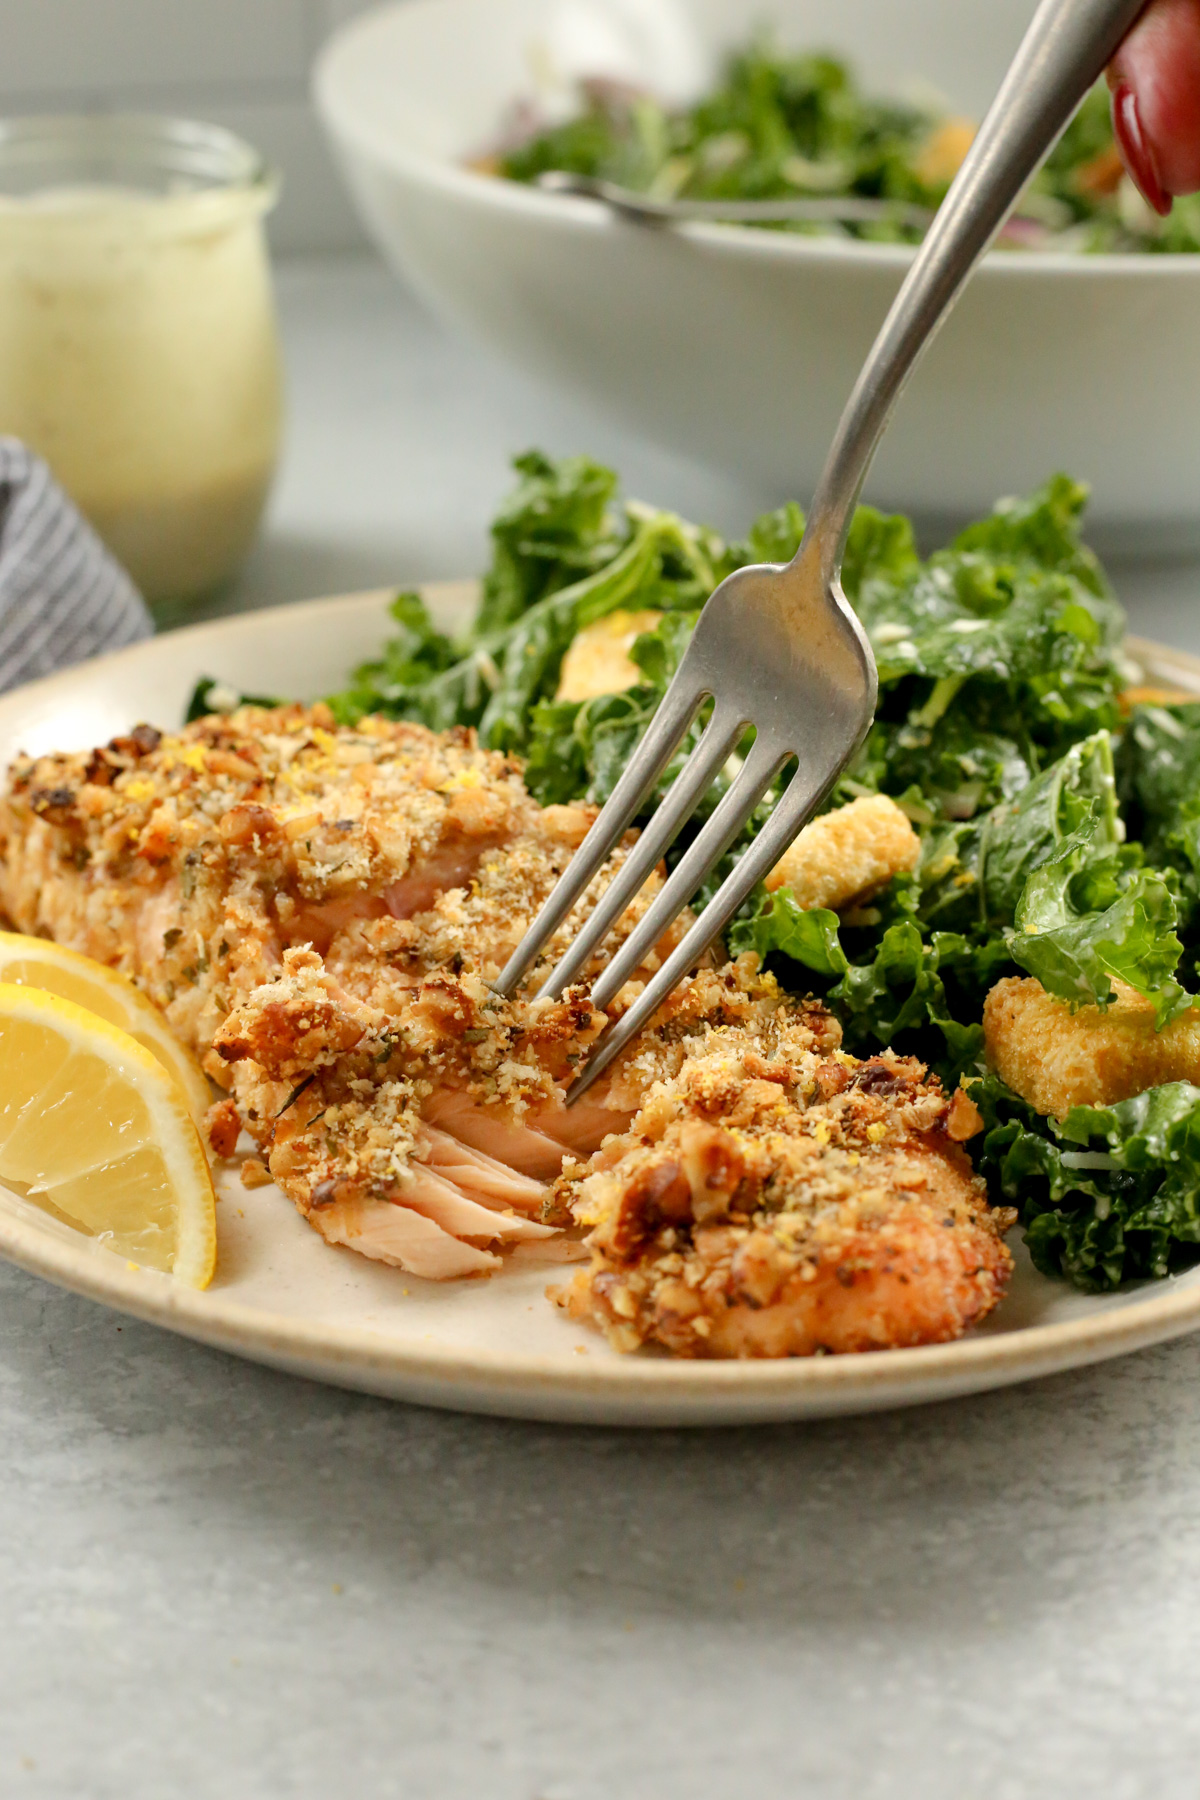 A silver fork reaches on a dinner plate to grab a bite of walnut crusted salmon, which is served with a side salad and two small lemon wedges